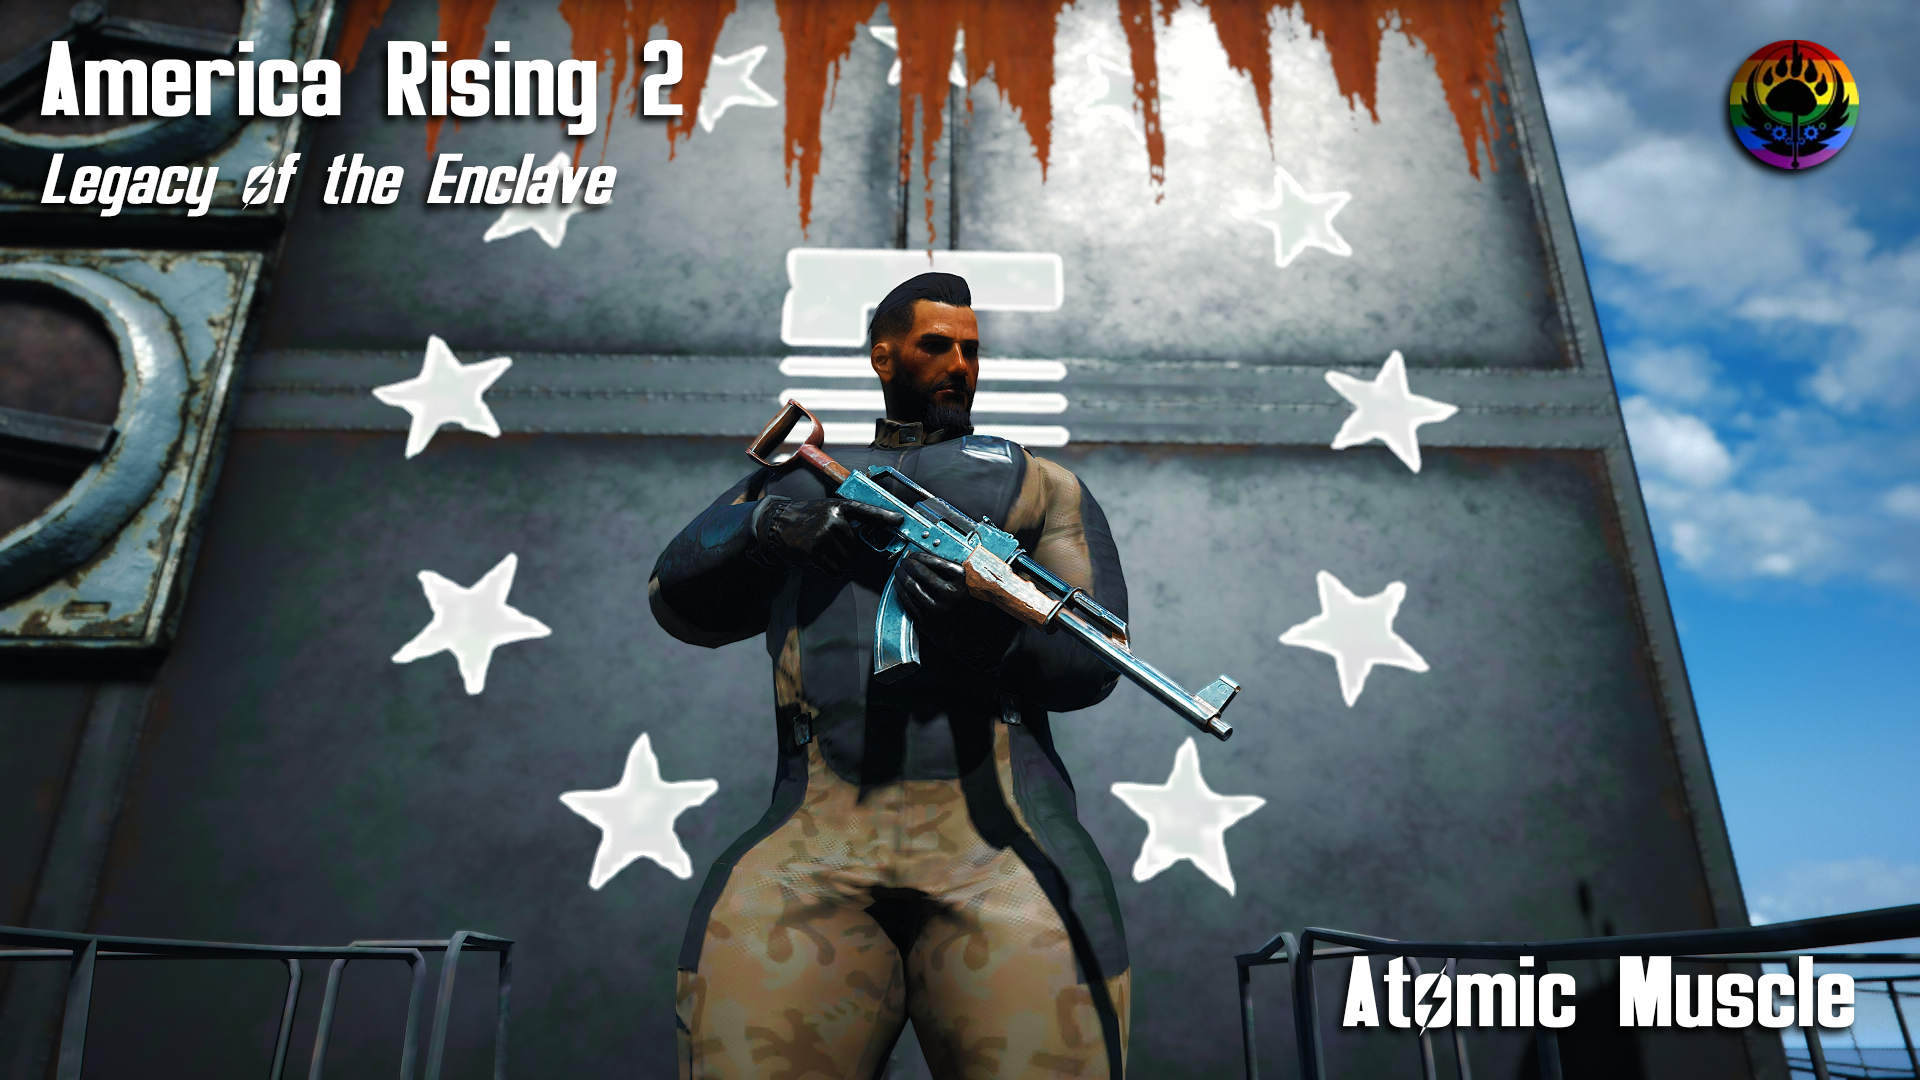 America Rising 2 - Legacy of the Enclave for Atomic Muscle